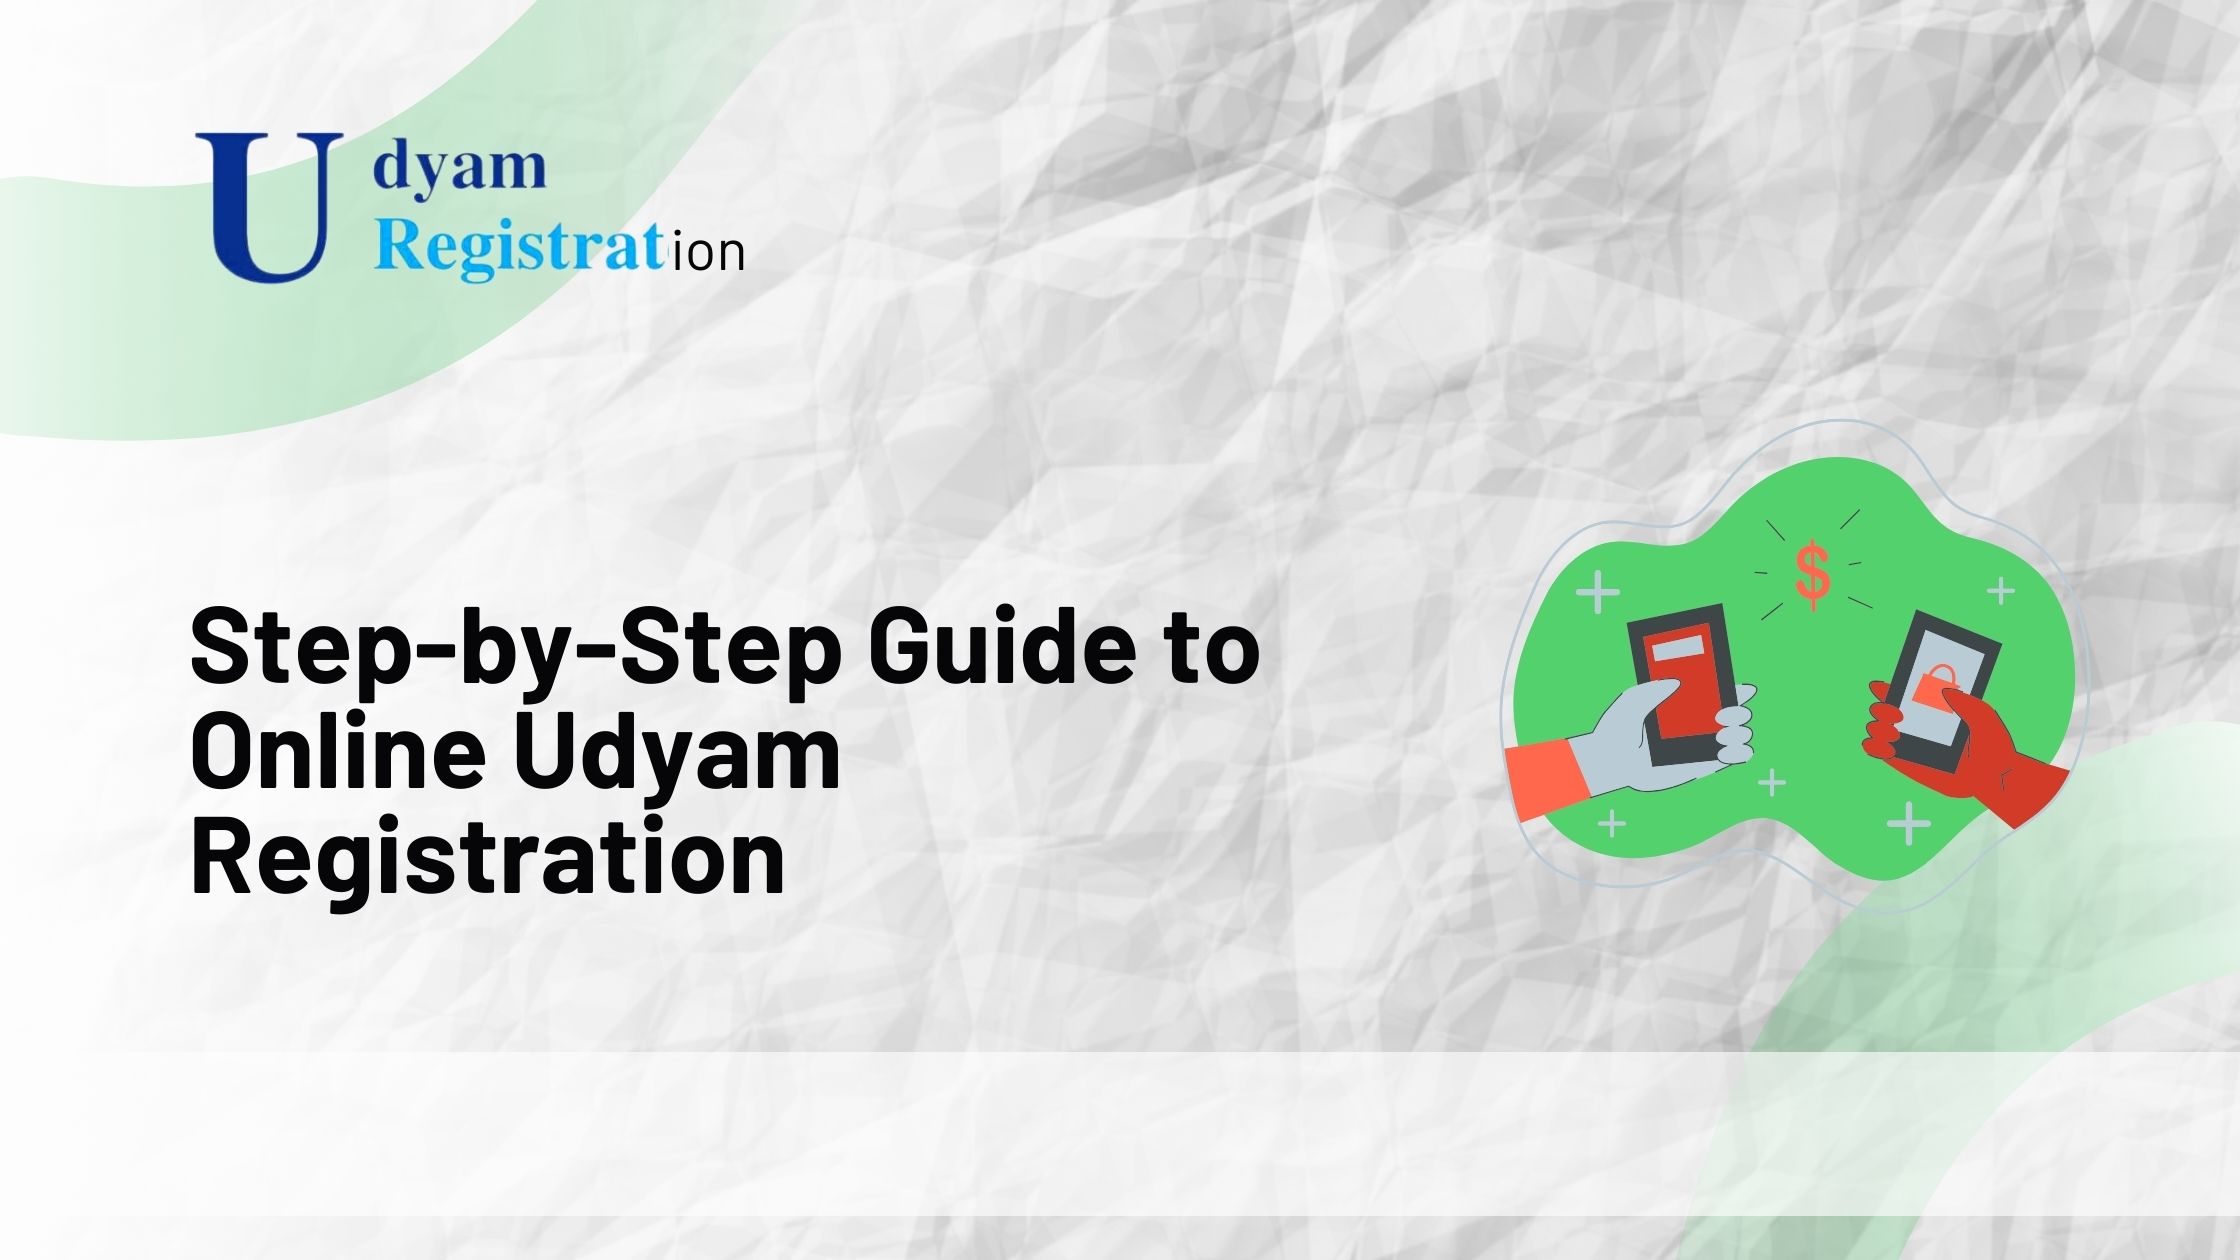 Step-by-Step Guide to Online Udyam Registration